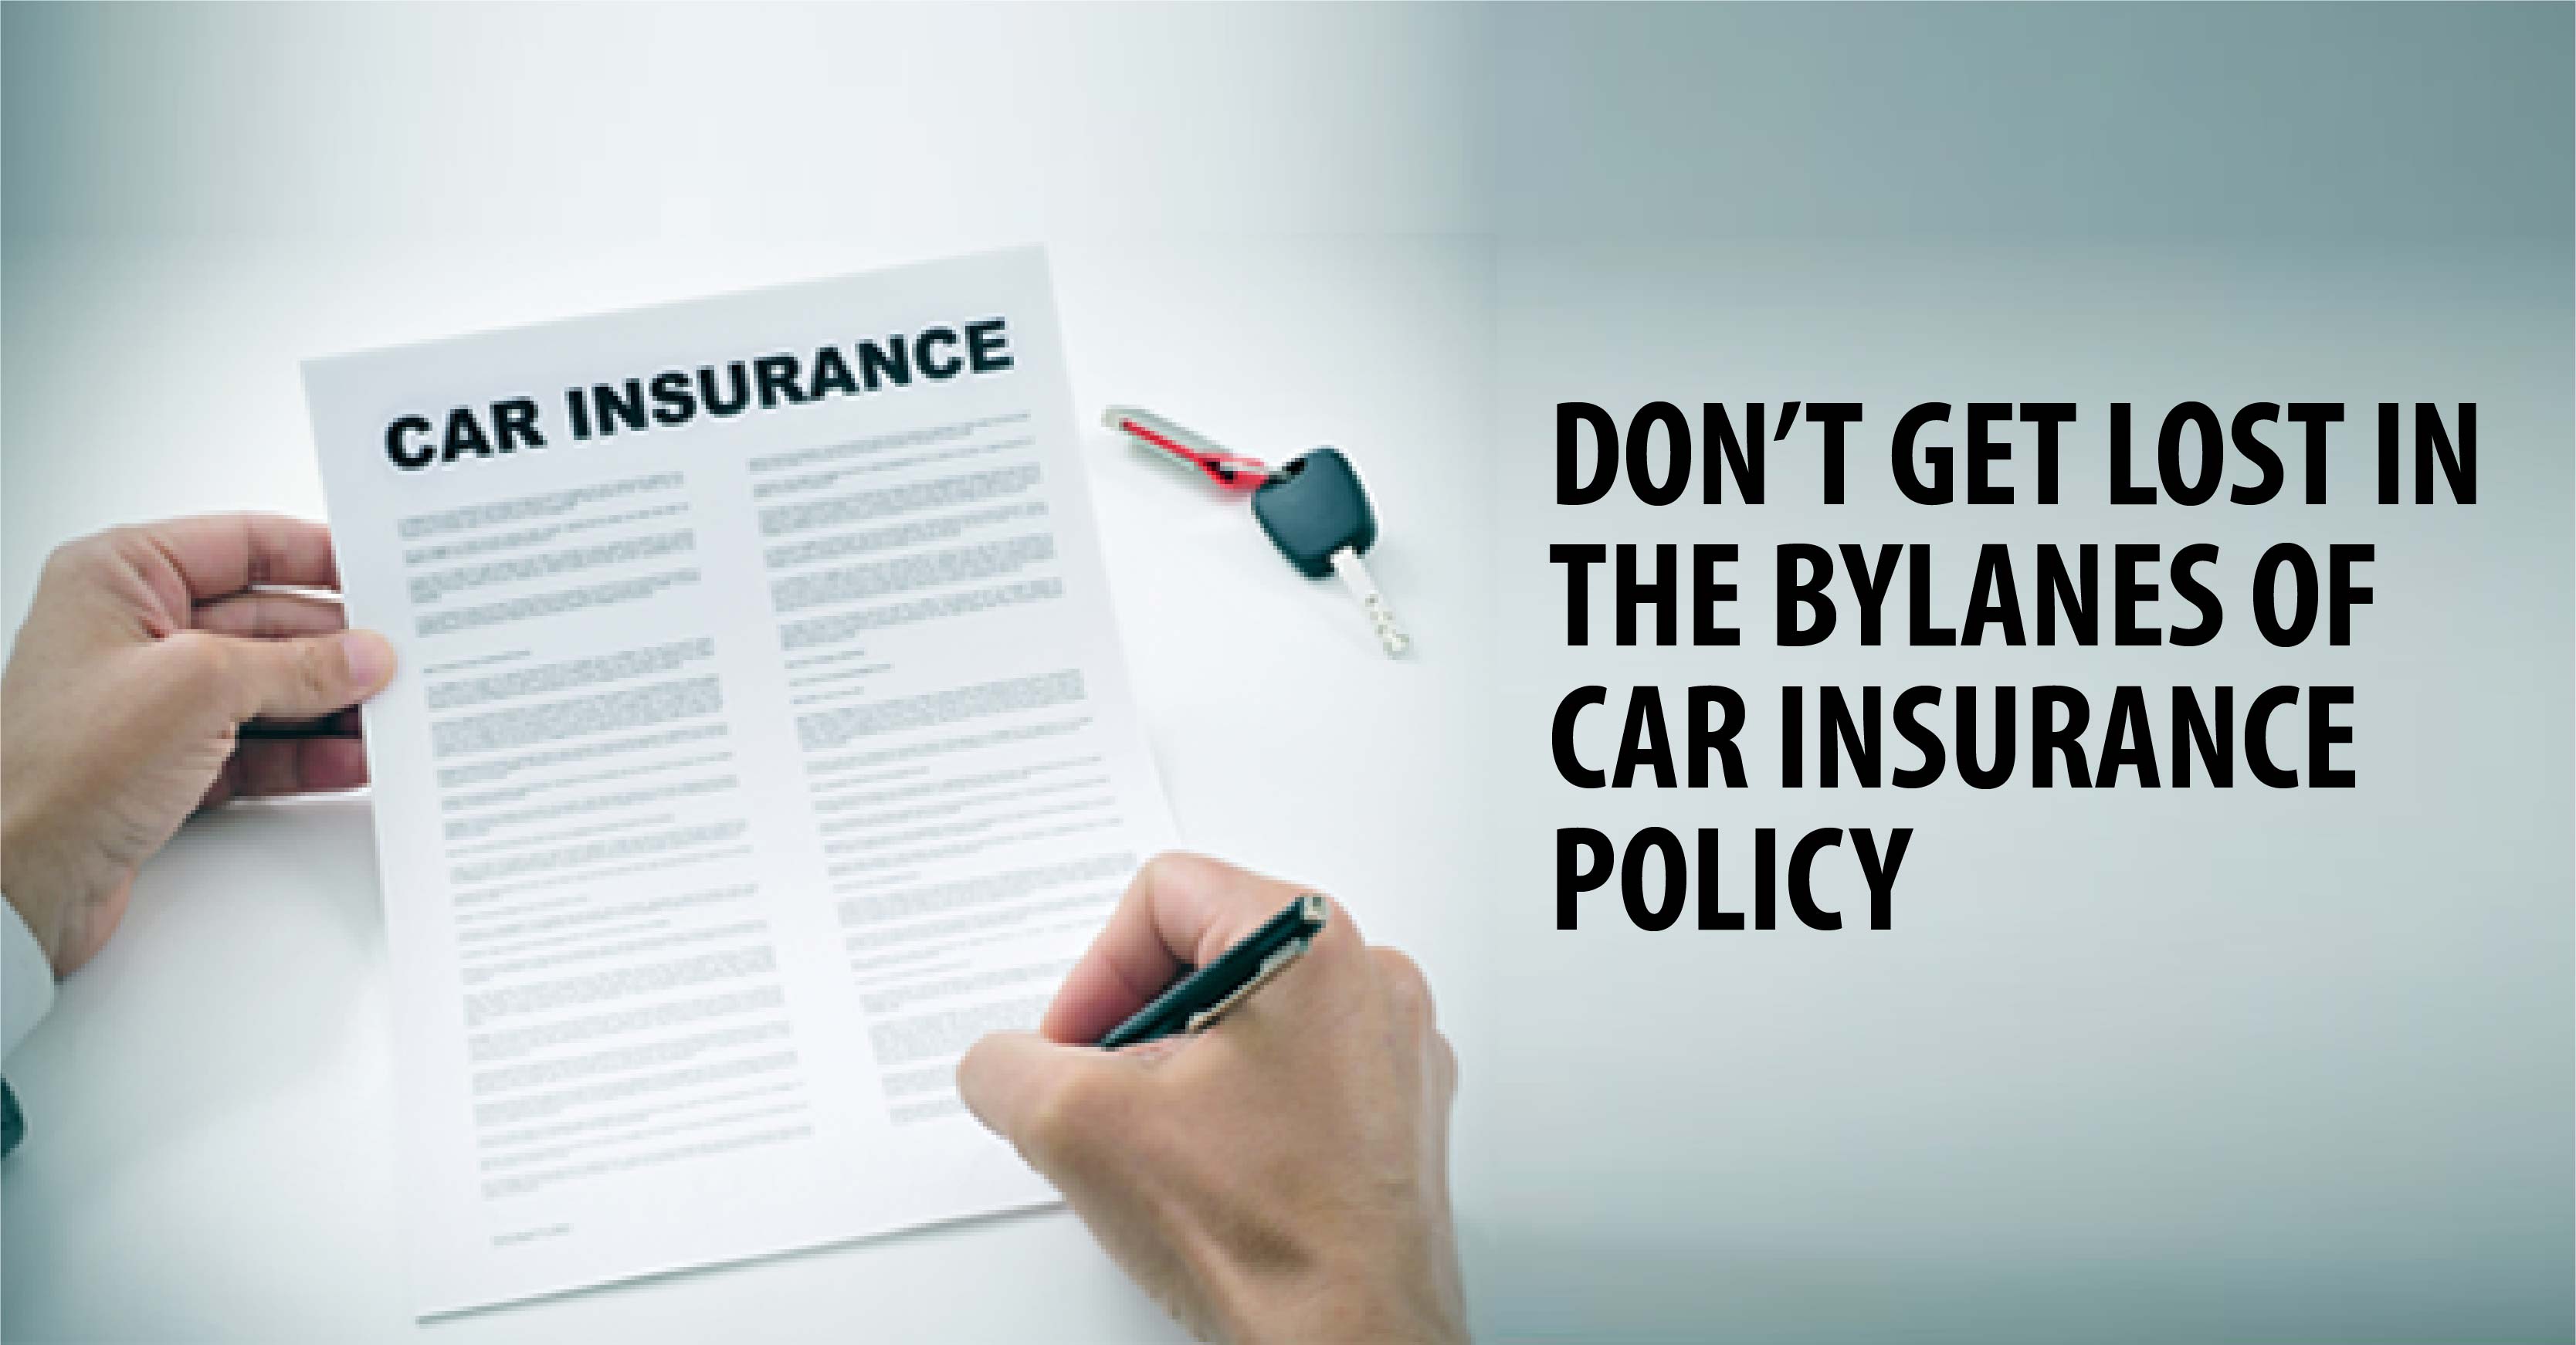 DON’T GET LOST IN THE BYLANES OF CAR INSURANCE POLICY